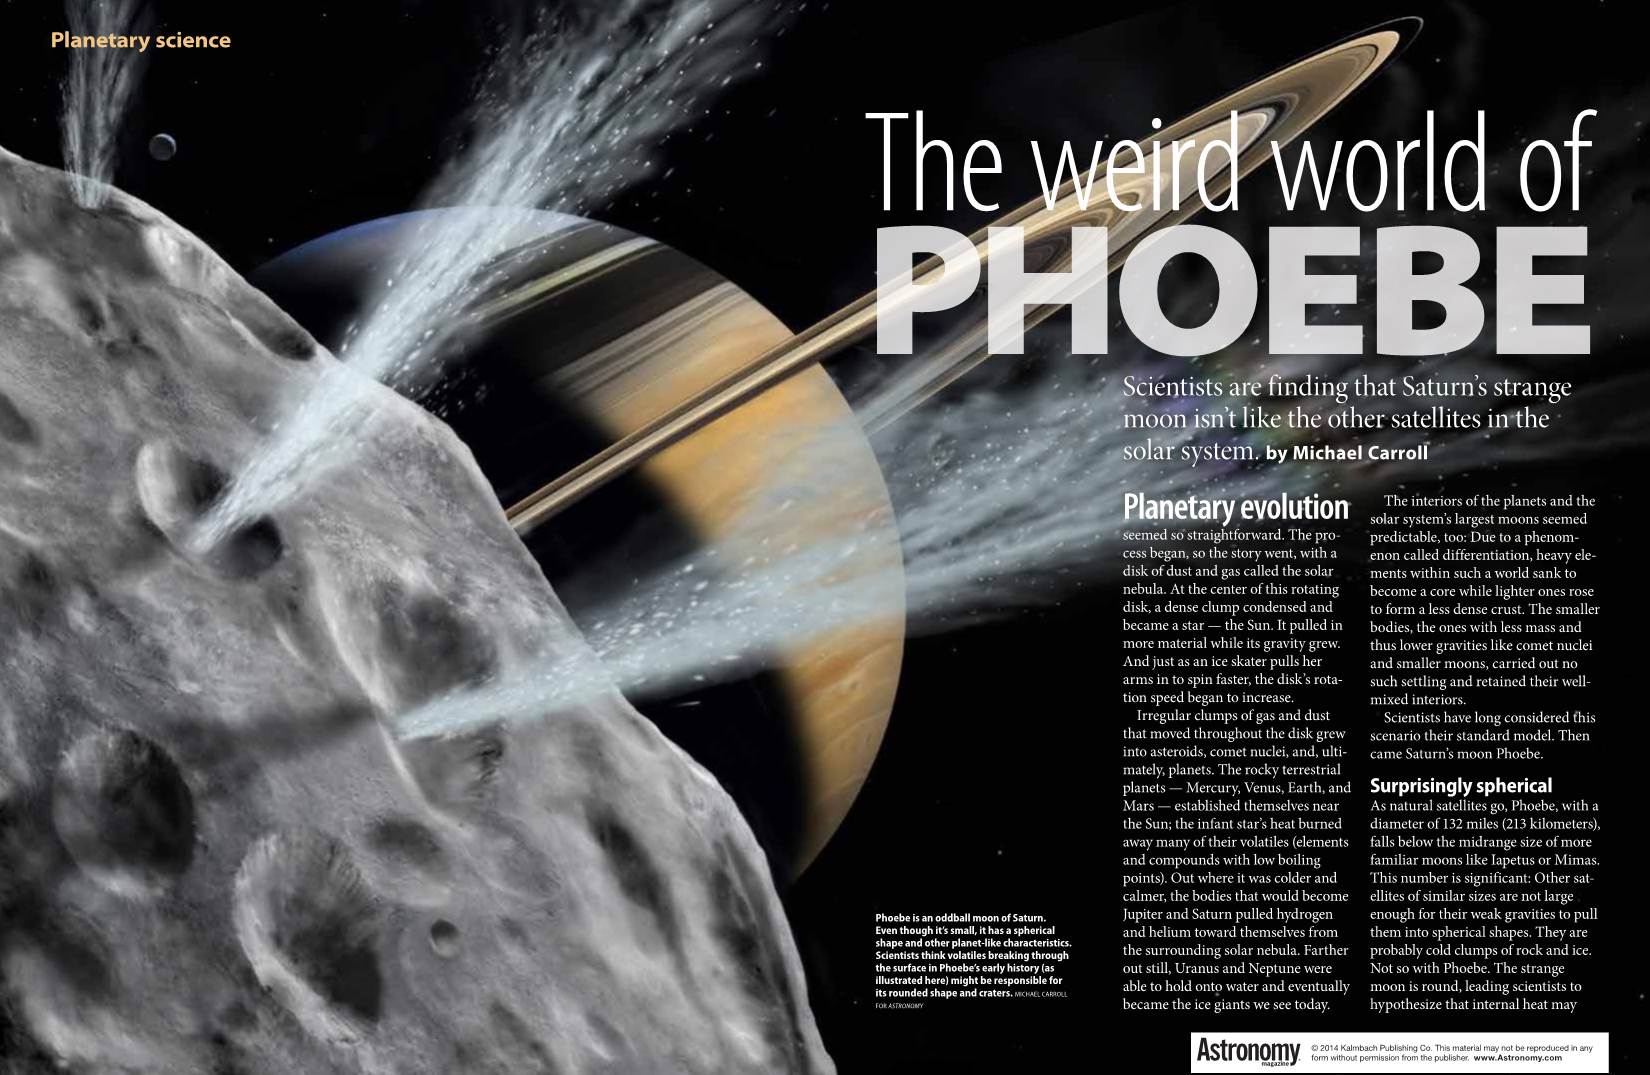 The Weird World of PHOEBE Scientists Are Finding That Saturn’S Strange Moon Isn’T Like the Other Satellites in the Solar System